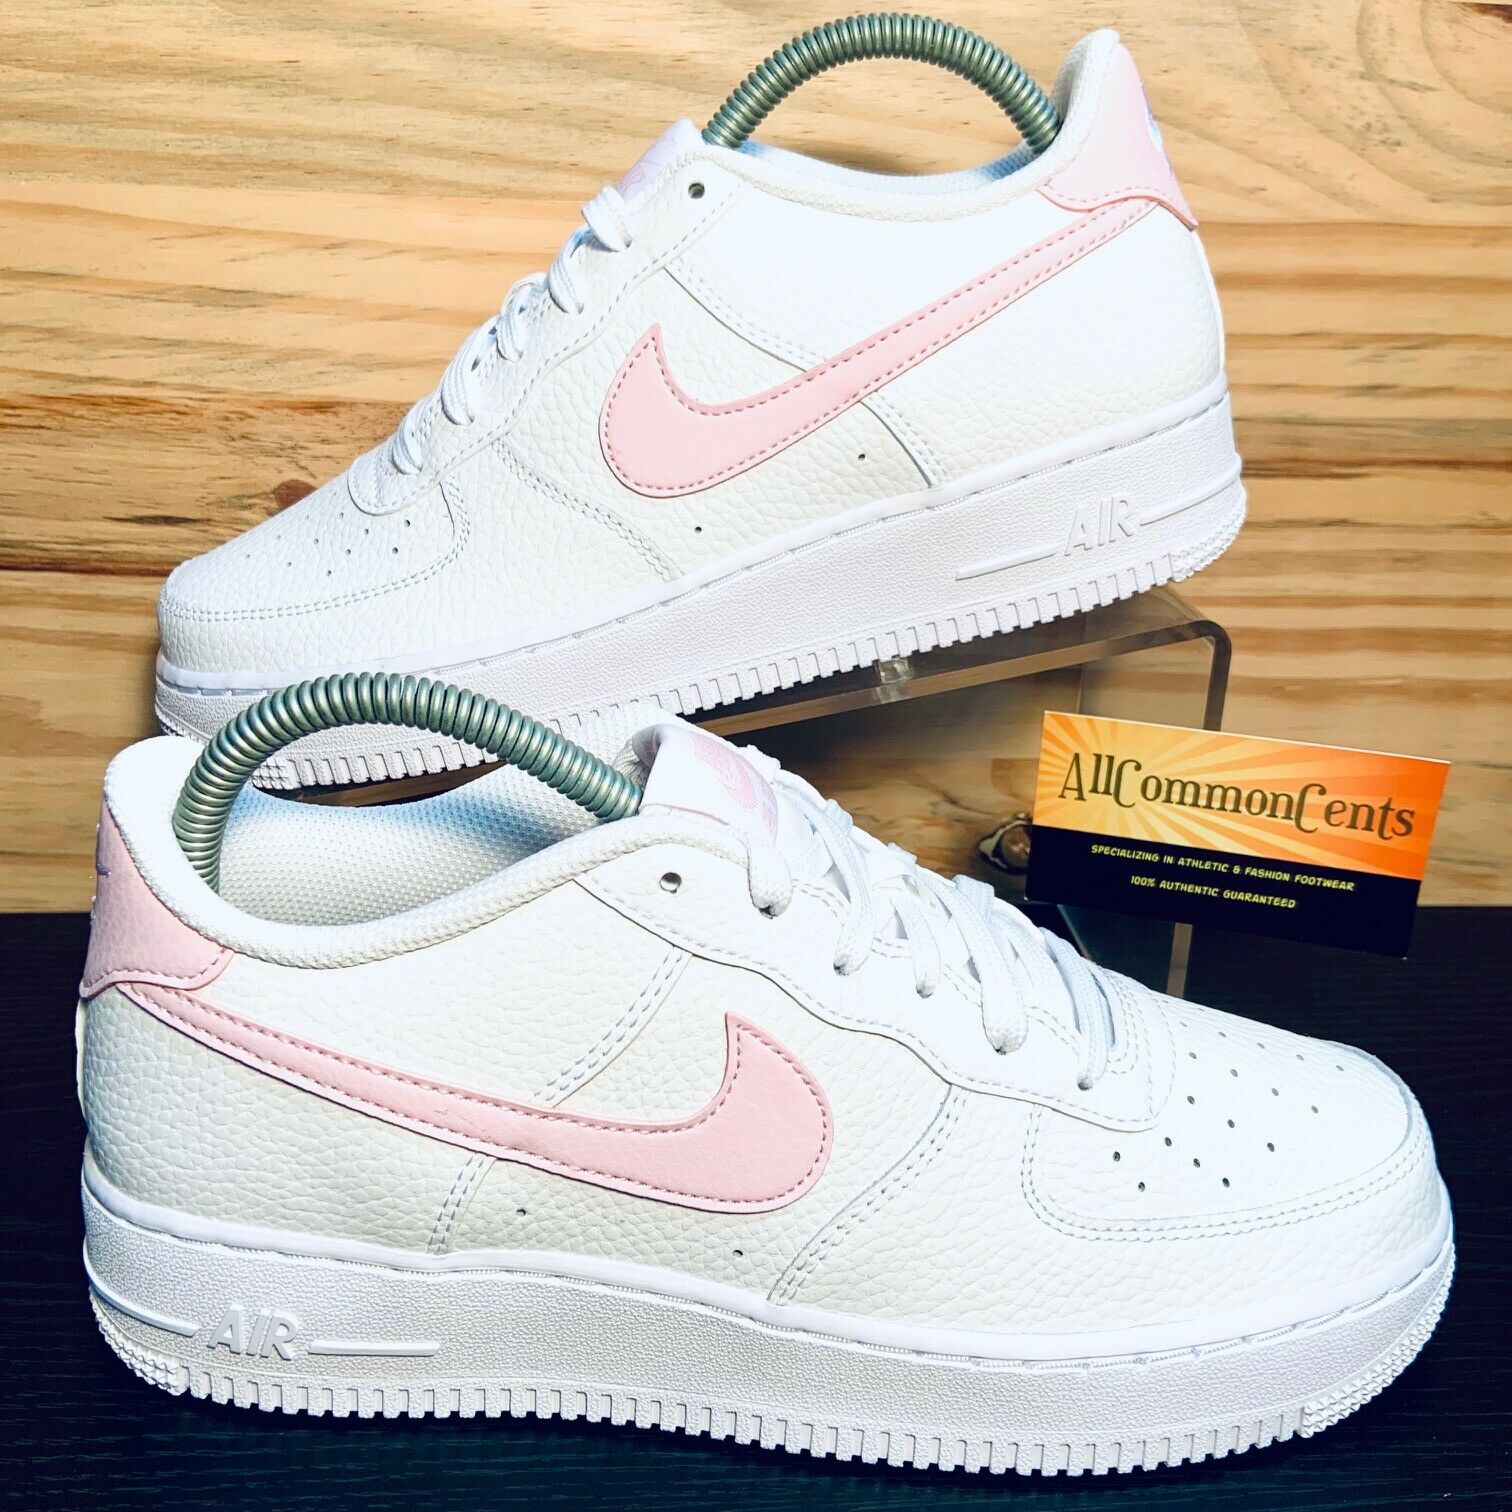 Nike Air Force 1 Low Women's Shoes Size 8 Pink Foam 6.5Y Leather NEW CT3839-103